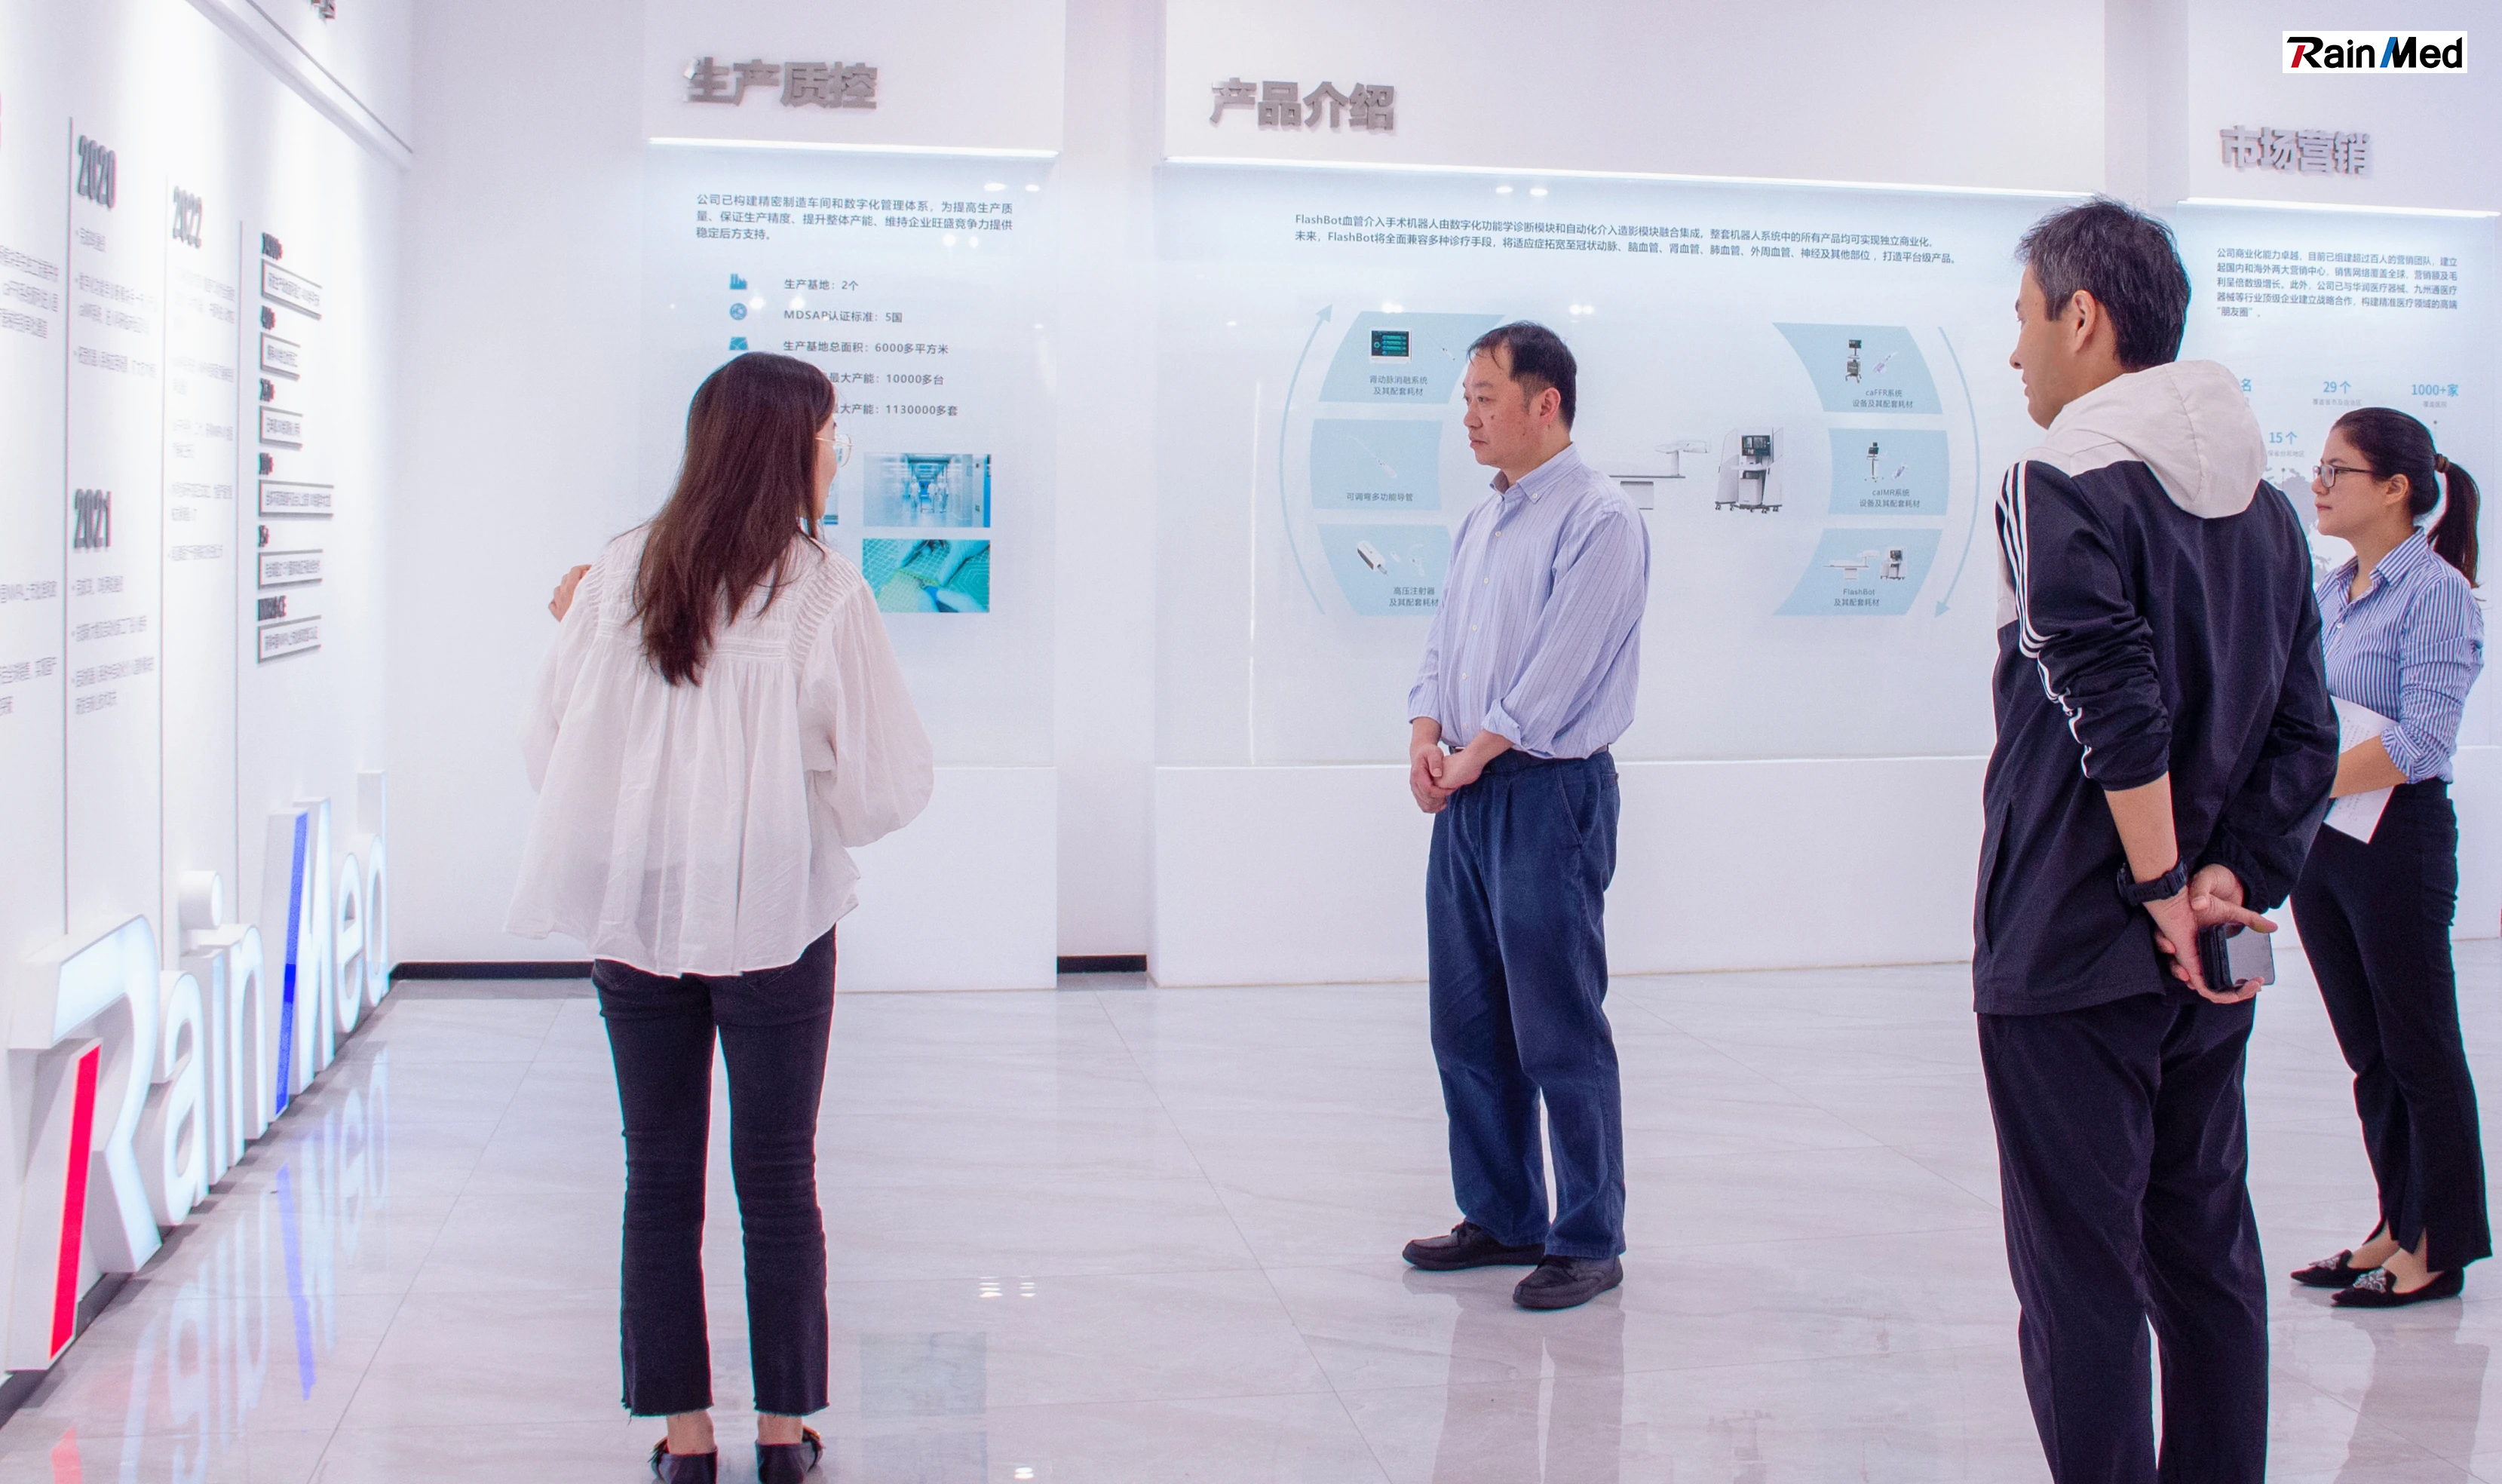 Huihui Wu, Deputy Director of Suzhou Industrial Park Administrative Committee, Visited RainMed Medical to Provide More Support for the Development of High-tech Medical Enterprises.